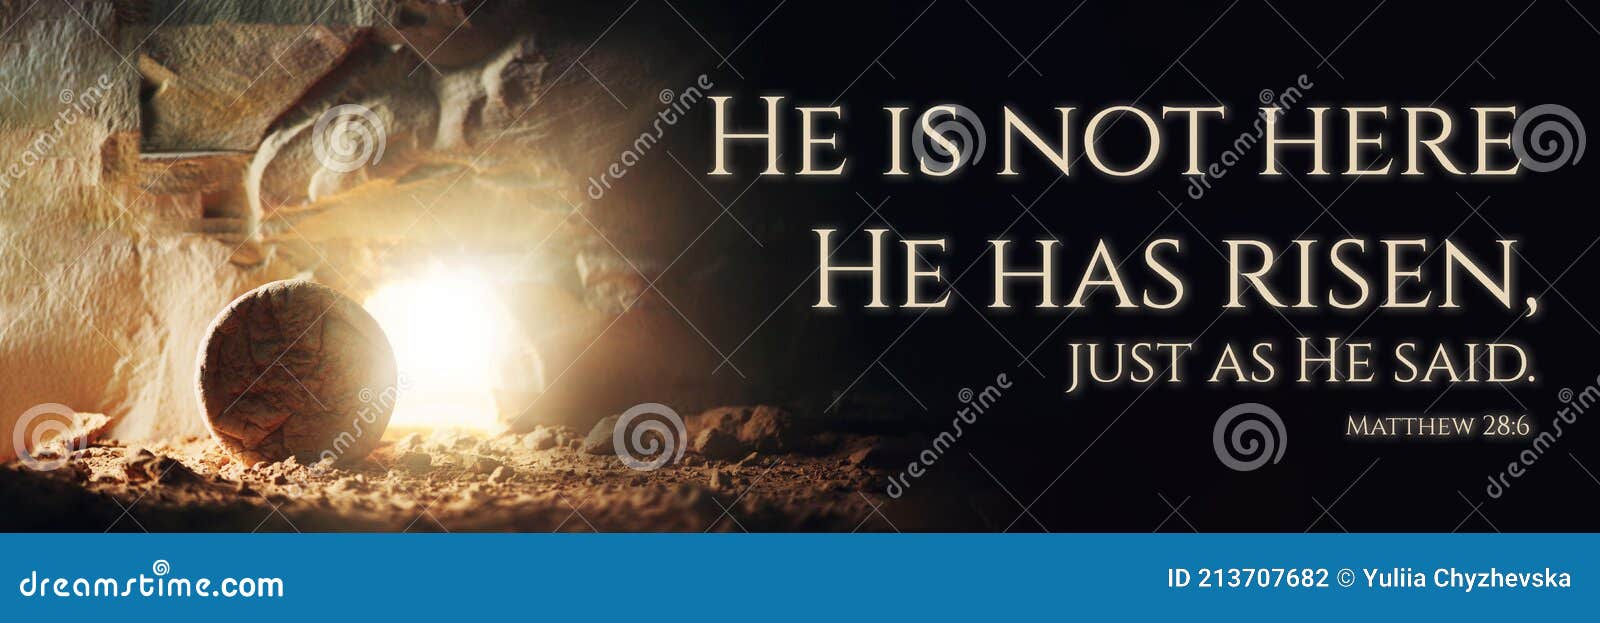 christian easter concept. jesus christ resurrection. empty tomb of jesus with light. born to die, born to rise. he is